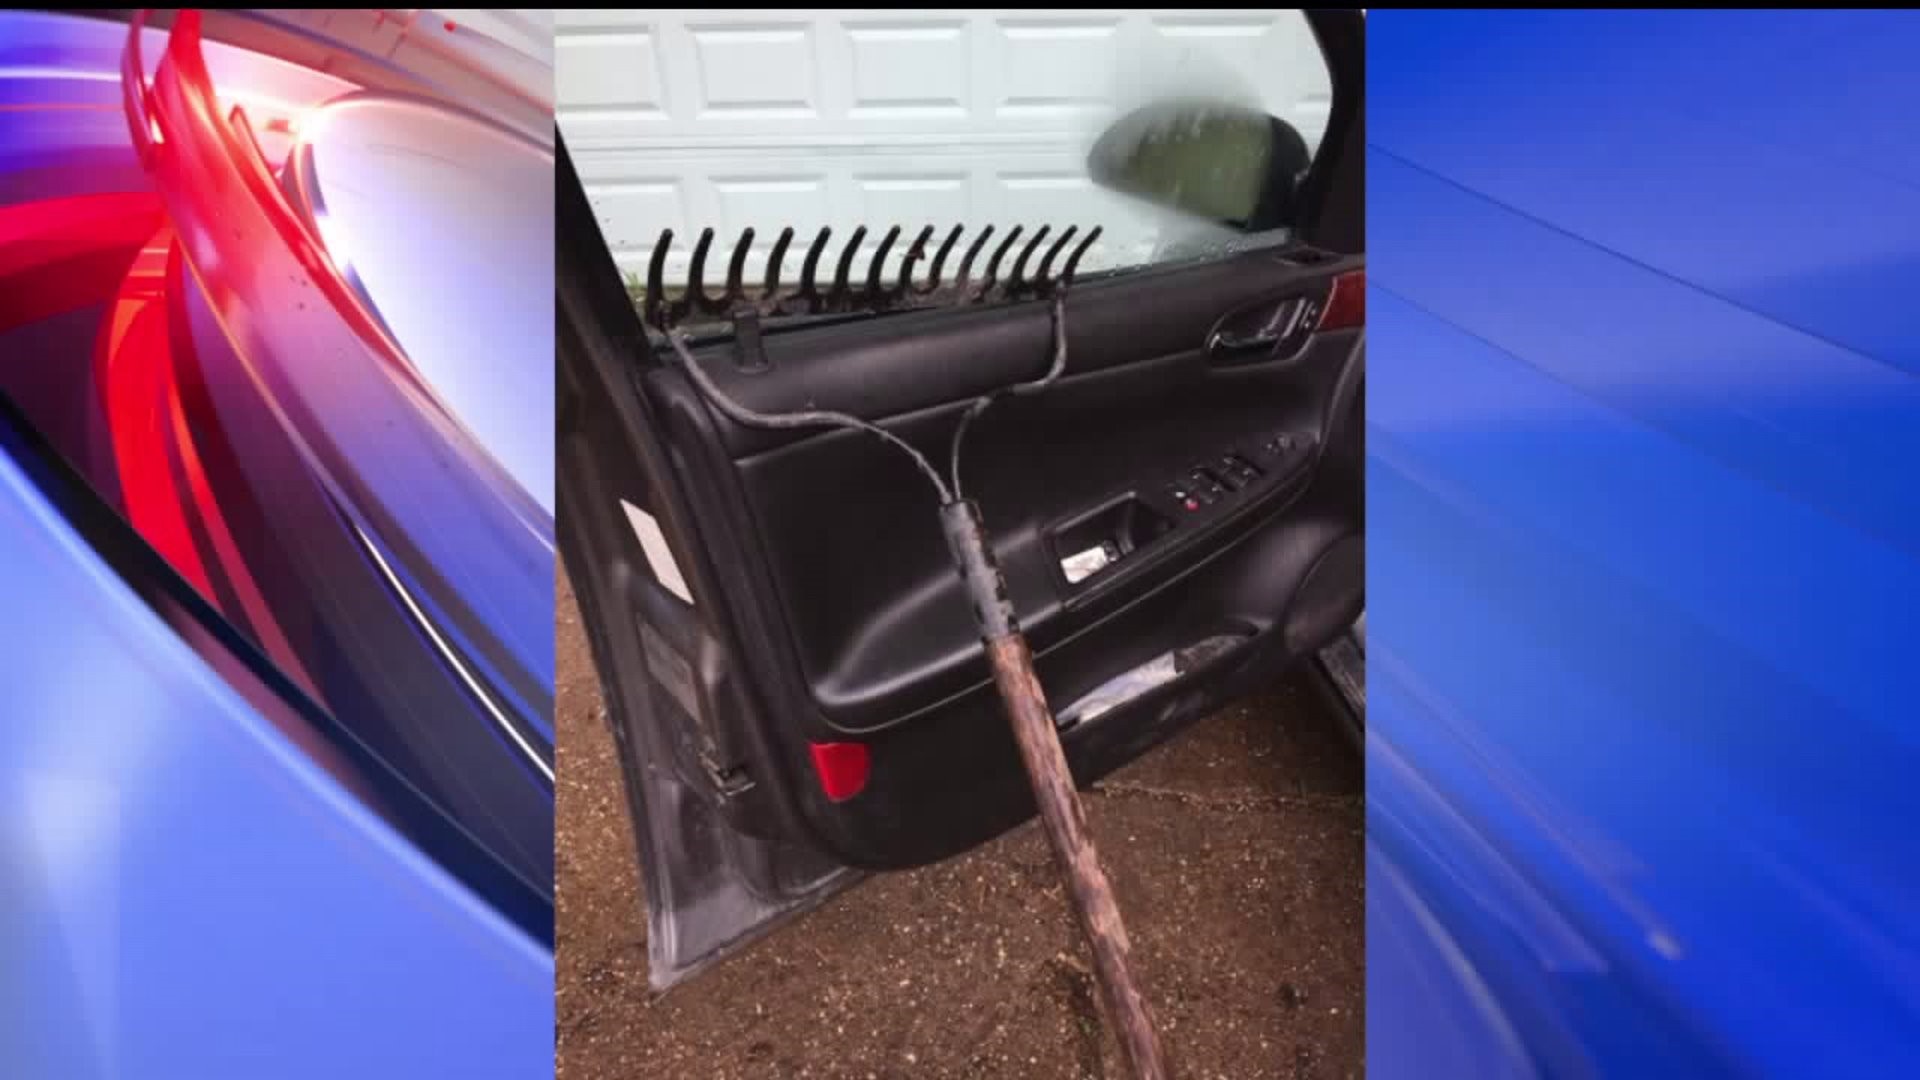 Woman finds snake in her car